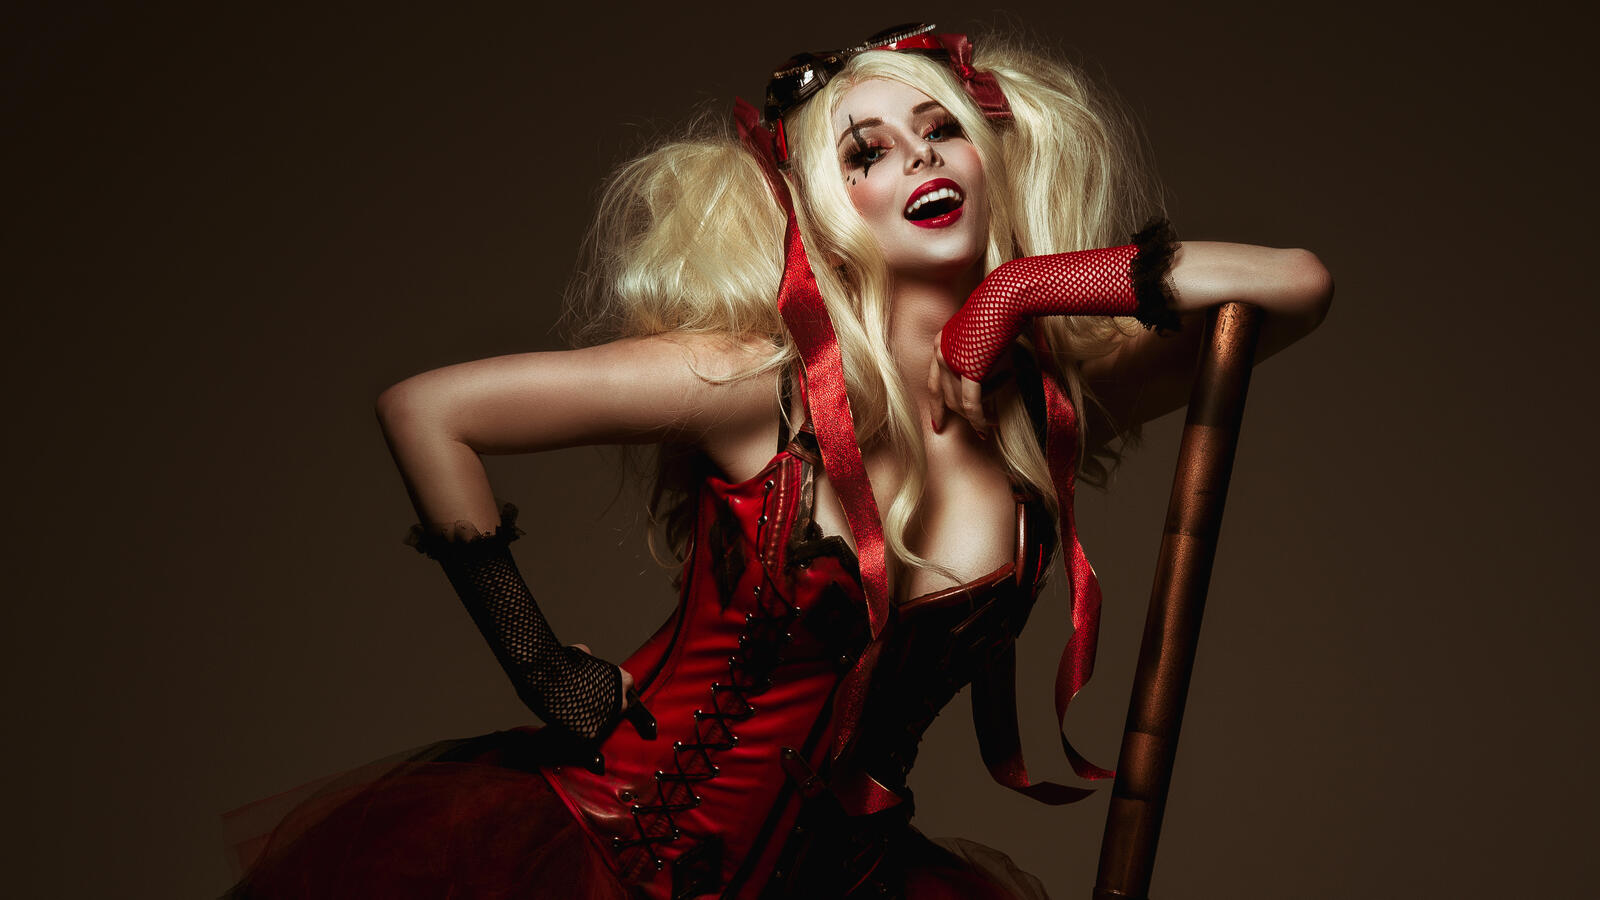 Free photo Harley Quinn in a red dress